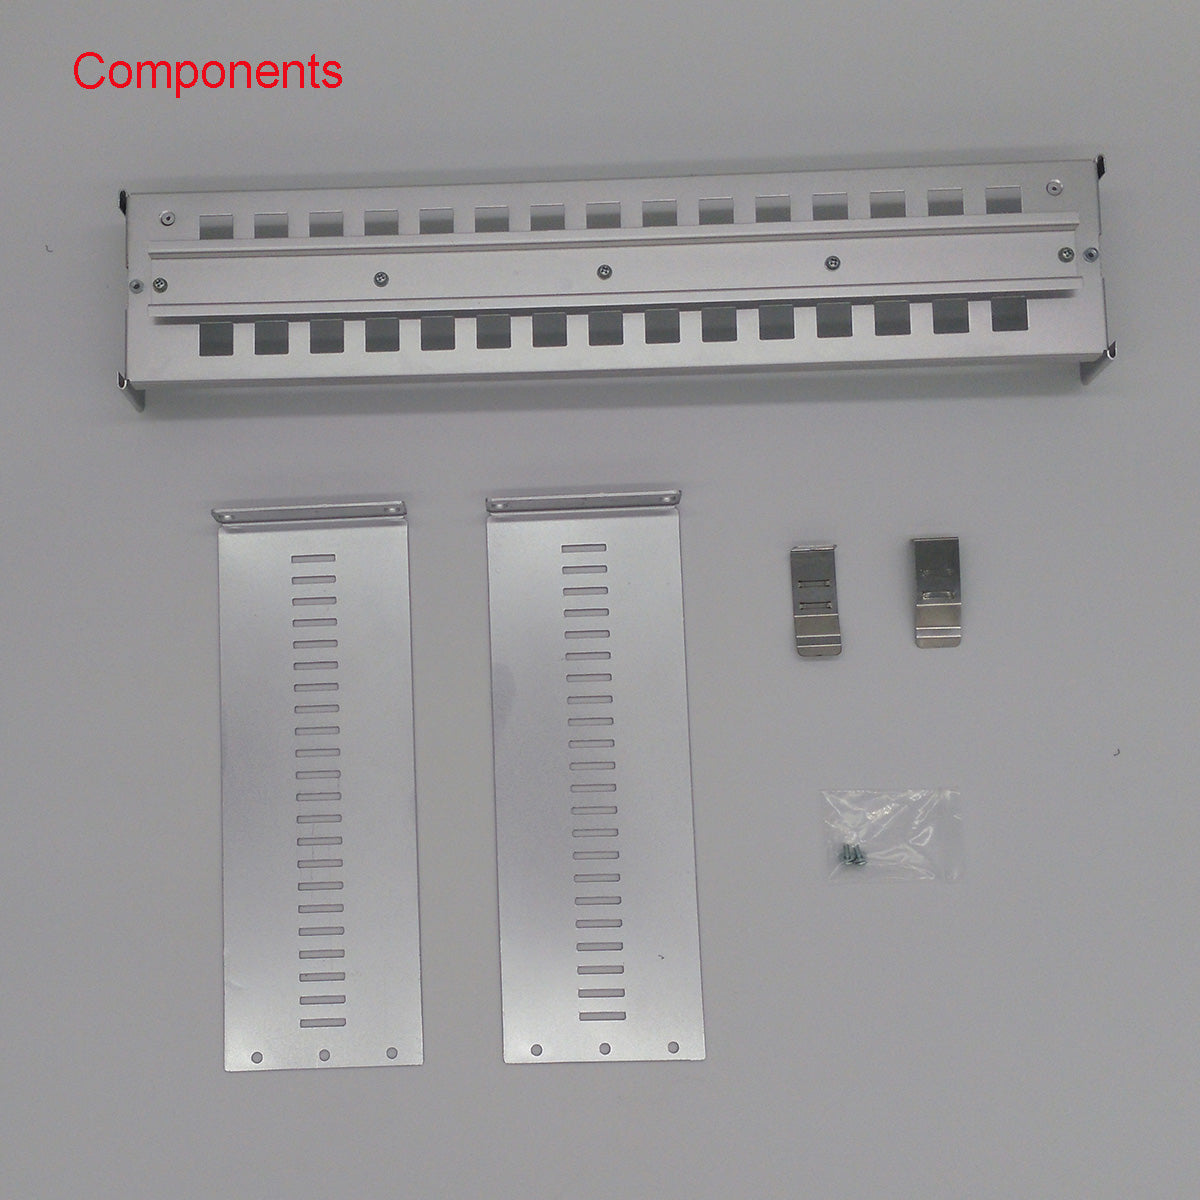 19 Inches Adjustable Rack Mount DIN Rail Bracket for Media Converters Ethernet Switch Industrial PoE Switch with Light and High Strength Aluminum Alloy Material